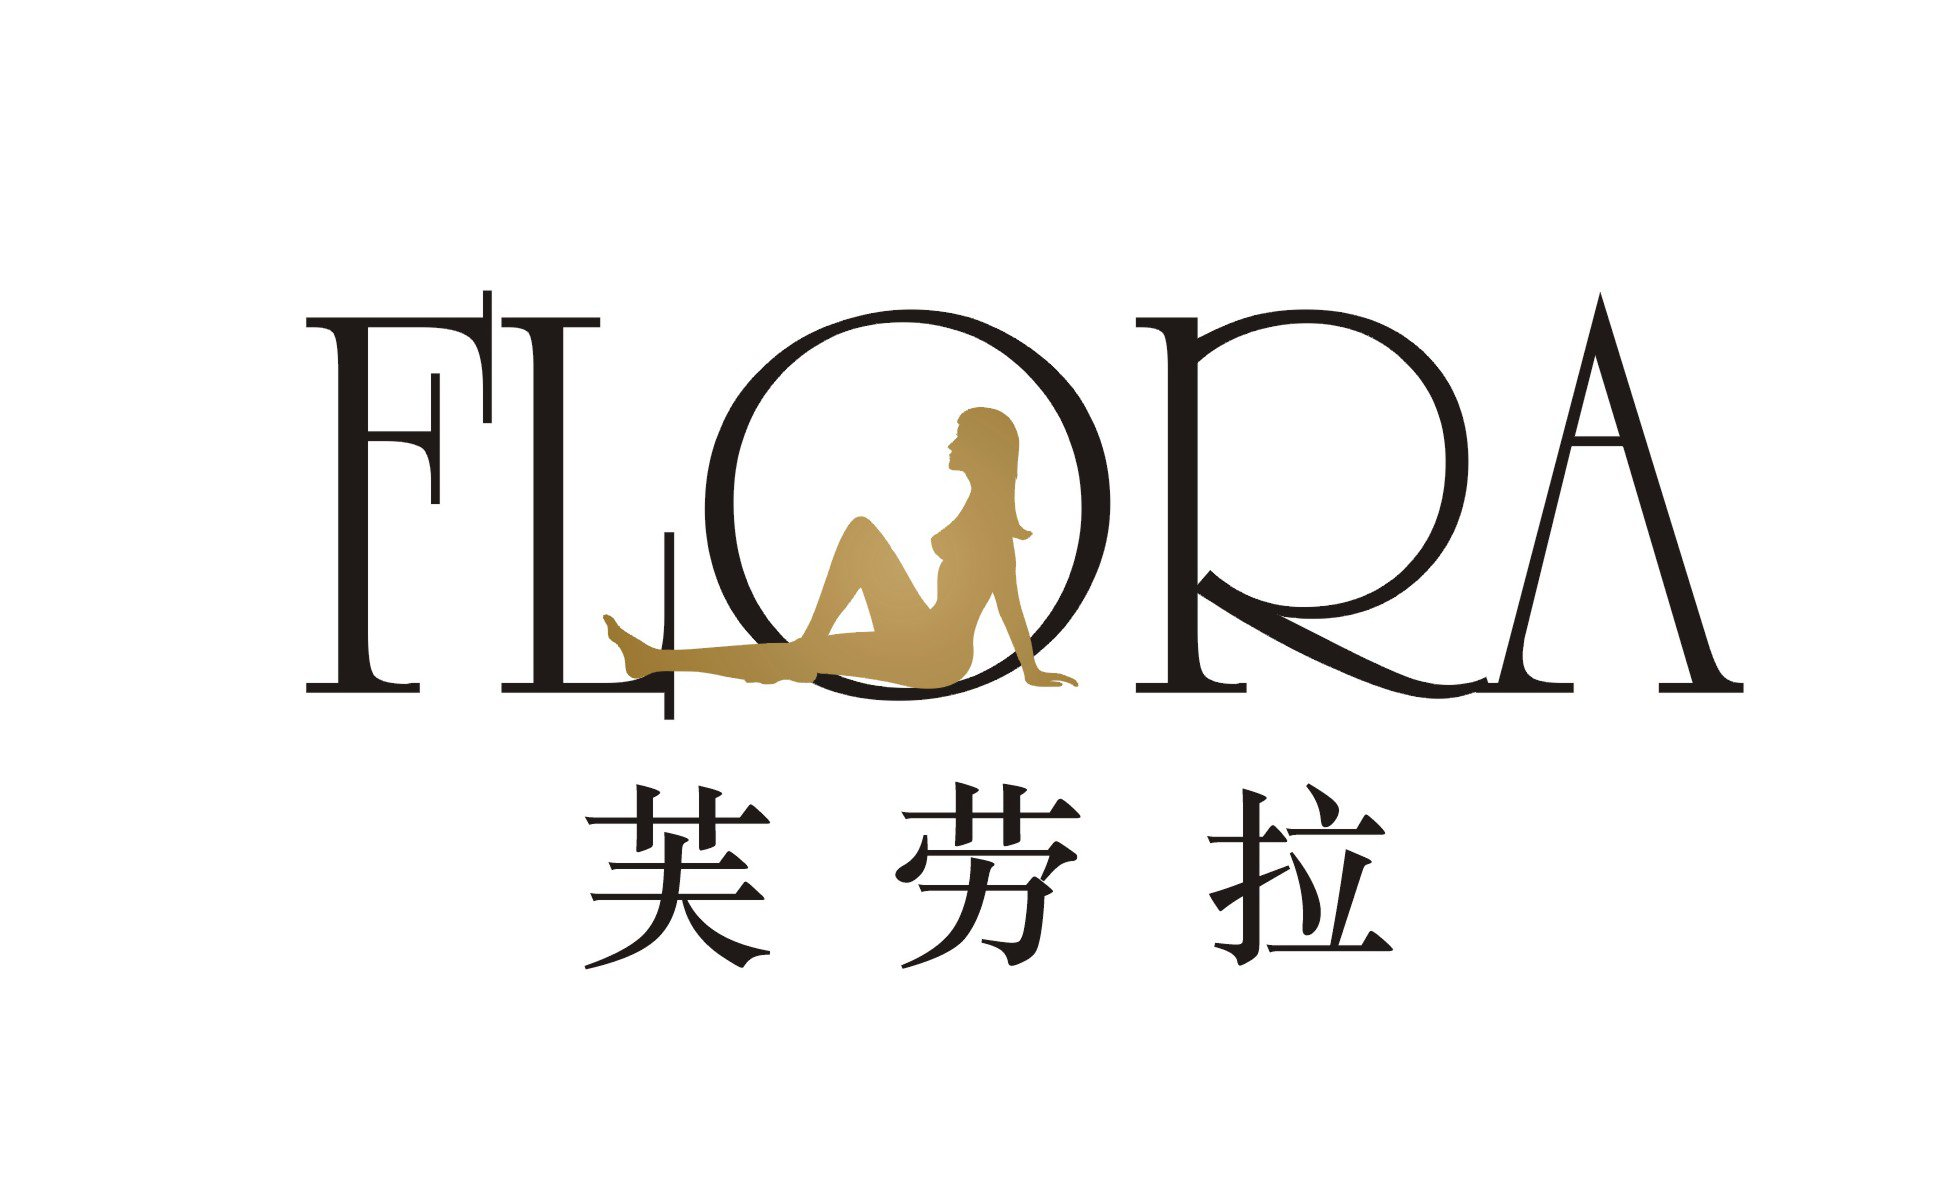  FLORA AND CHINESE WORDS